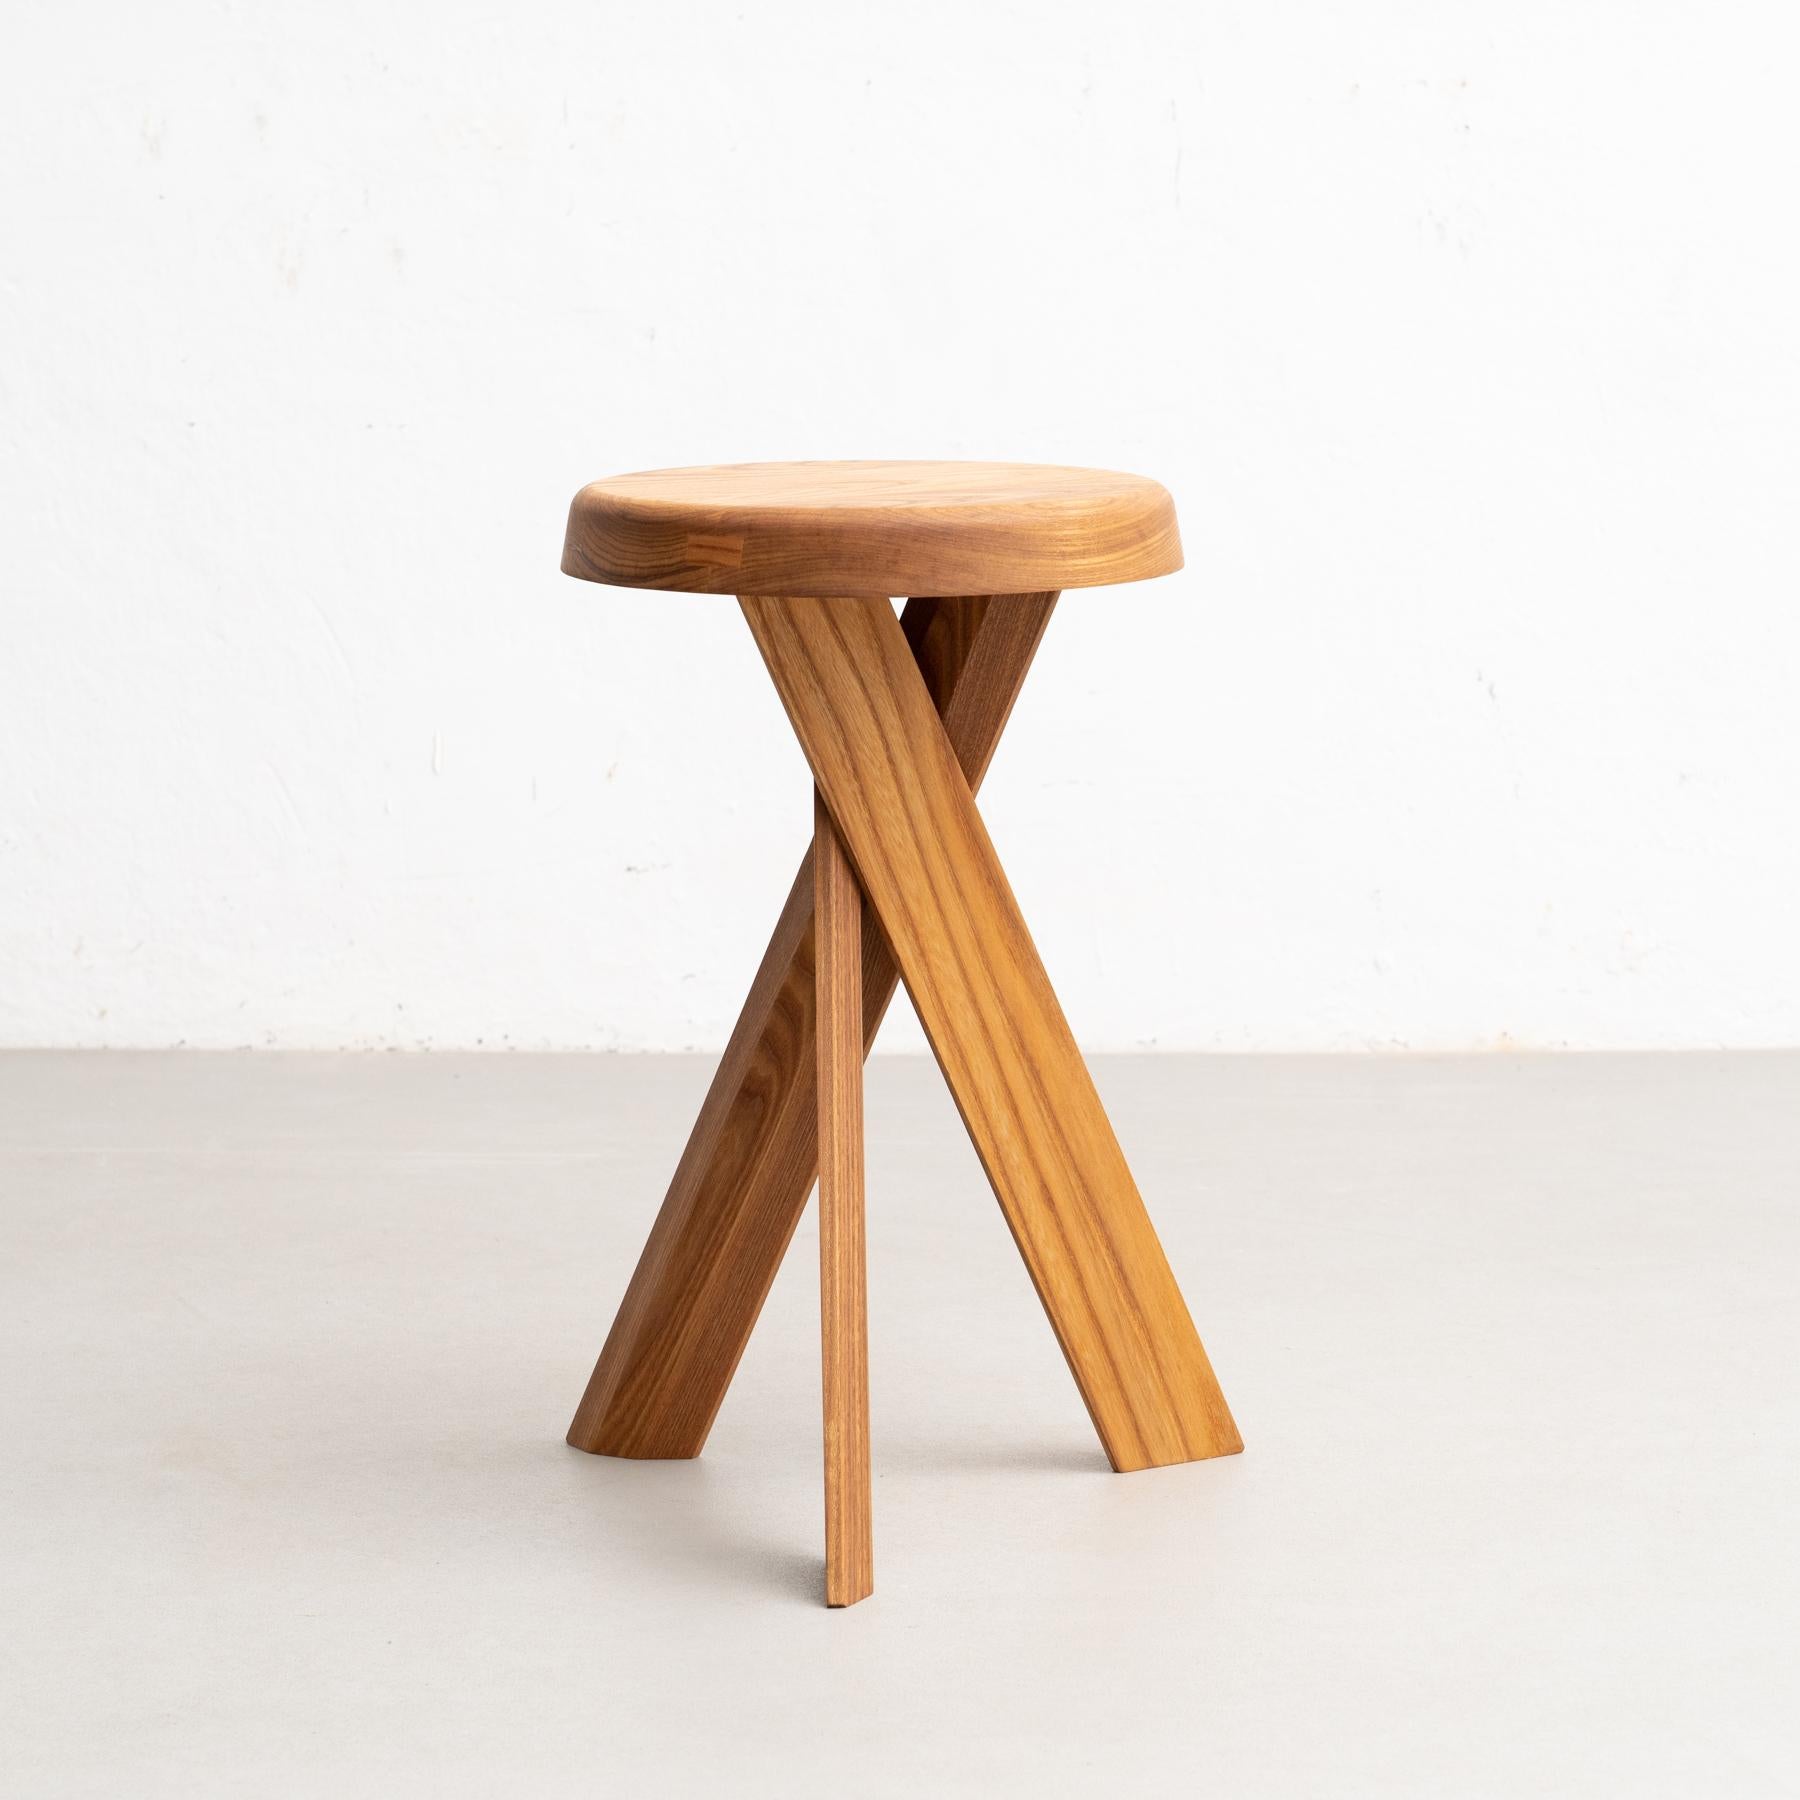 S 31 A stool designed by Pierre Chapo, circa 1960.

Manufactured by Chapo Creation in France, 2020.

Stamped solid elmwood.

In good original condition, with minor wear consistent with age and use, preserving a beautiful patina.

Pierre